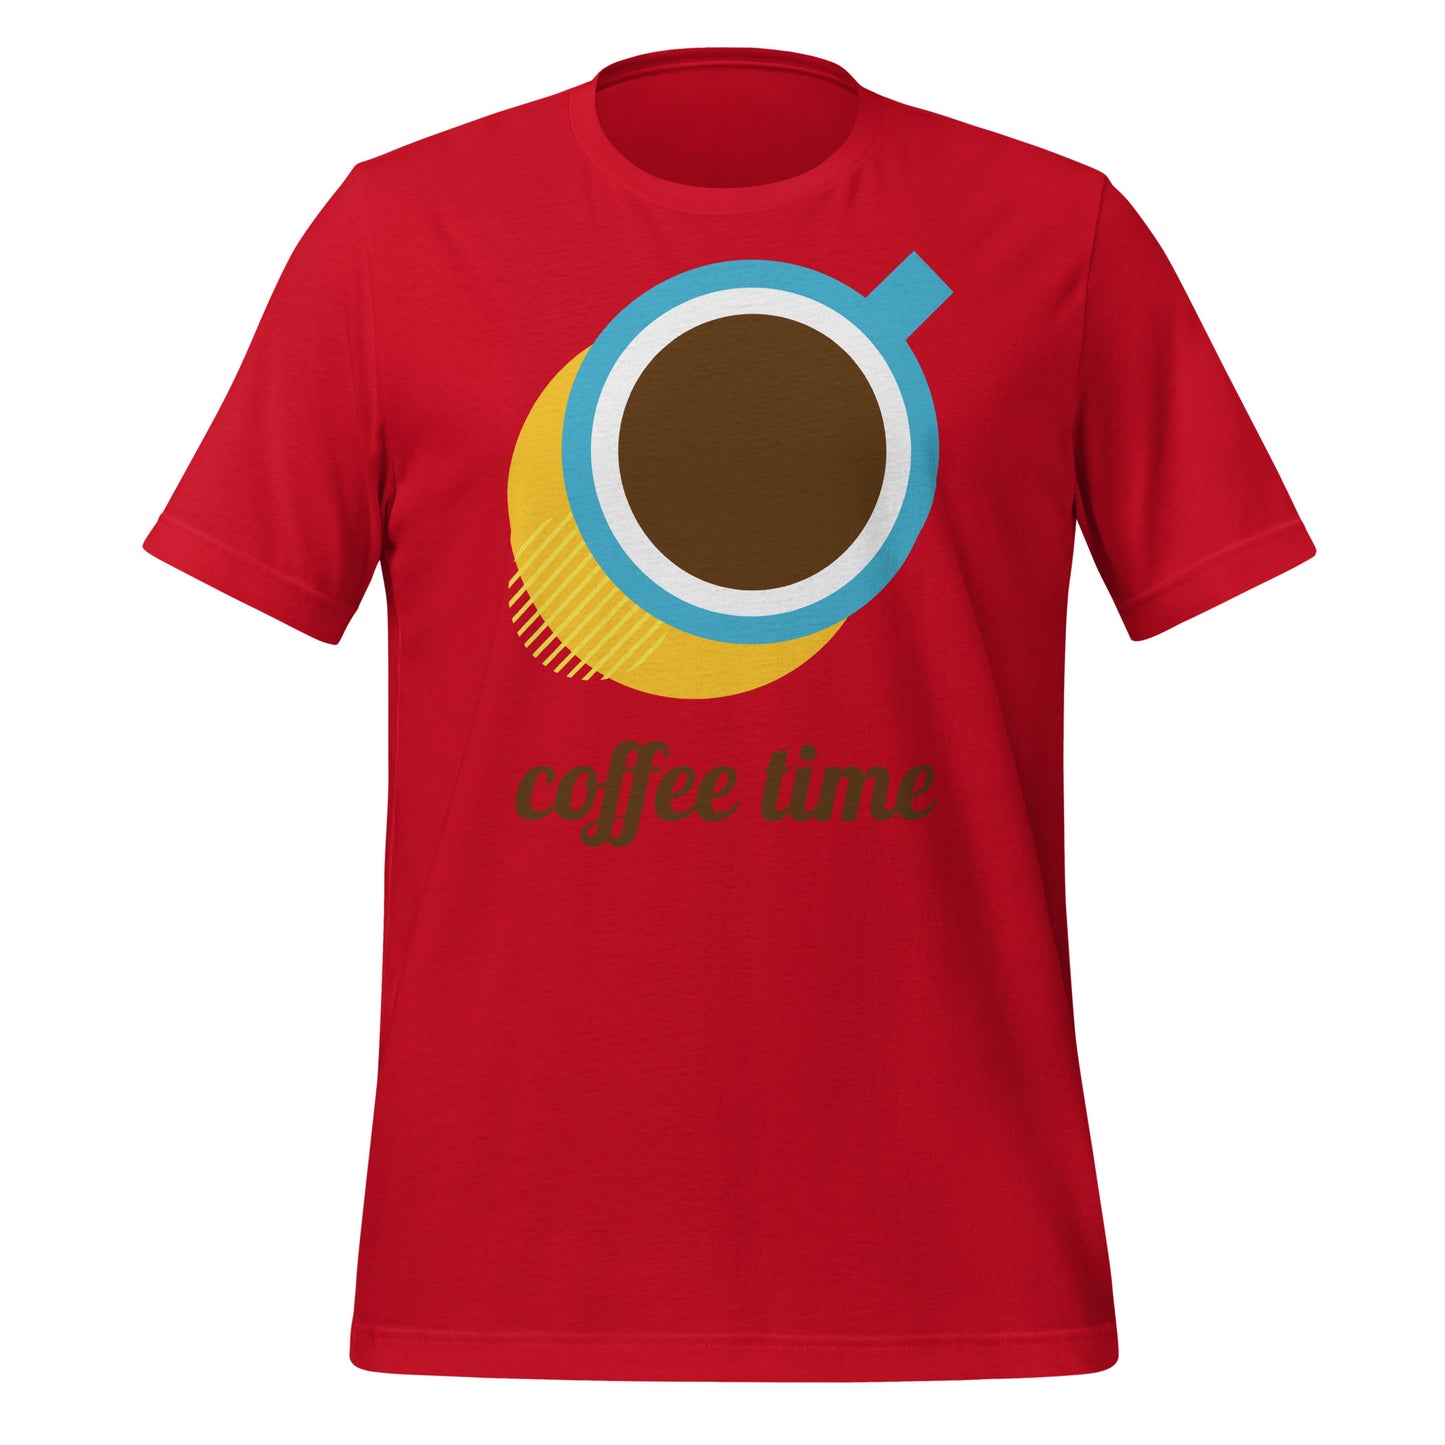 Coffee Time: Stylish T-Shirts for Caffeine Lovers!